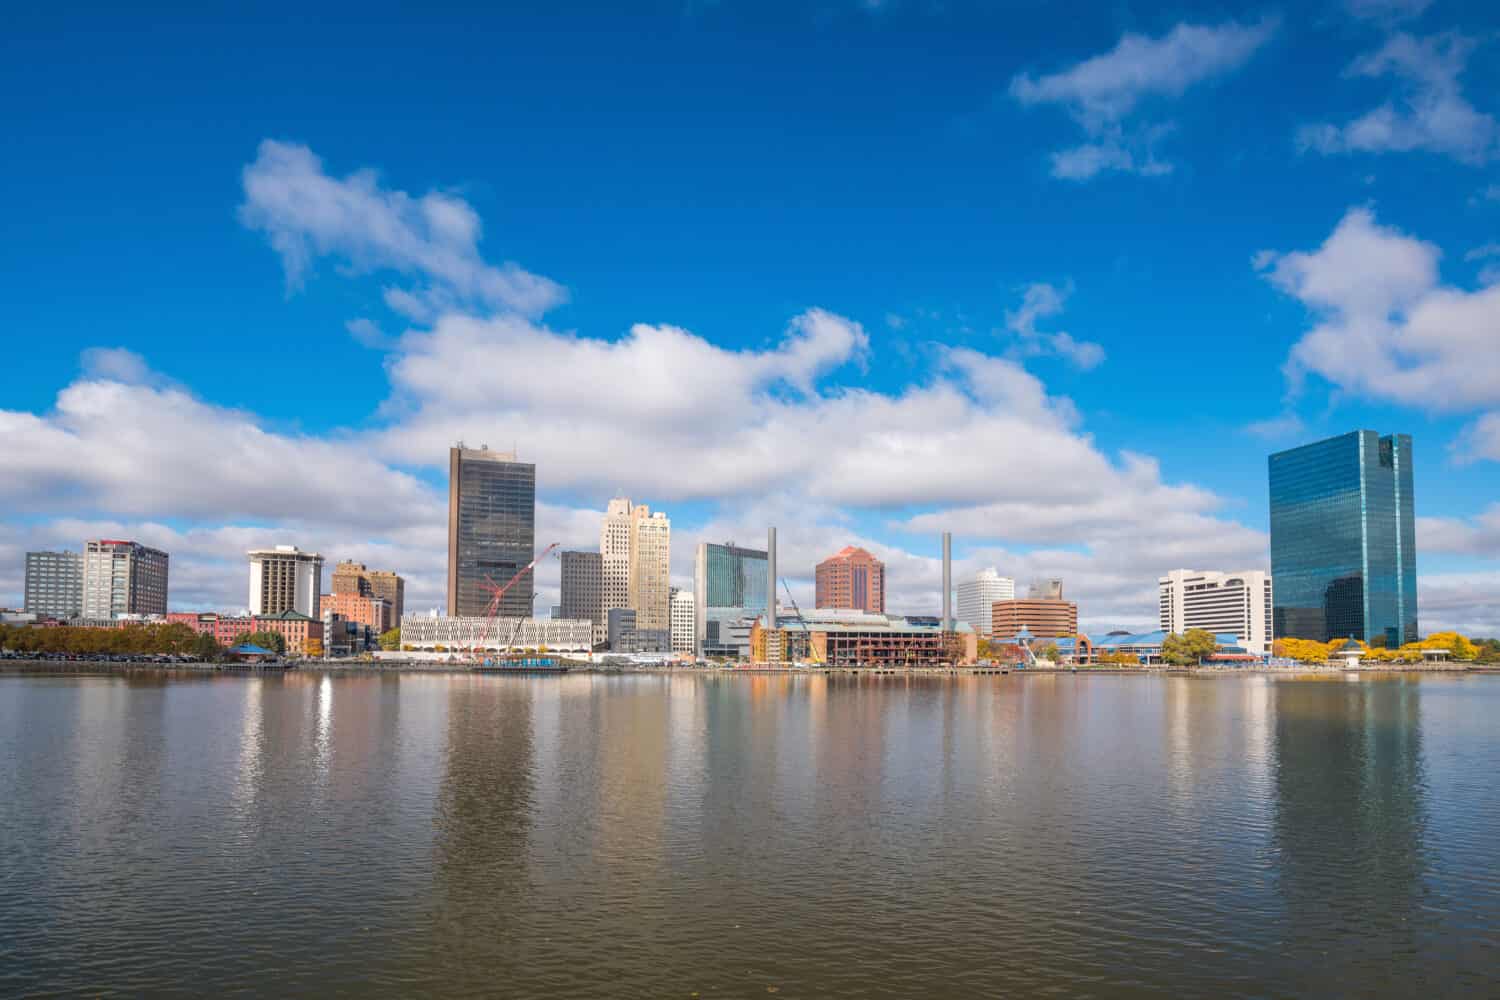 View of downtown Toledo skyline in Ohio, USA seen across Maumee River